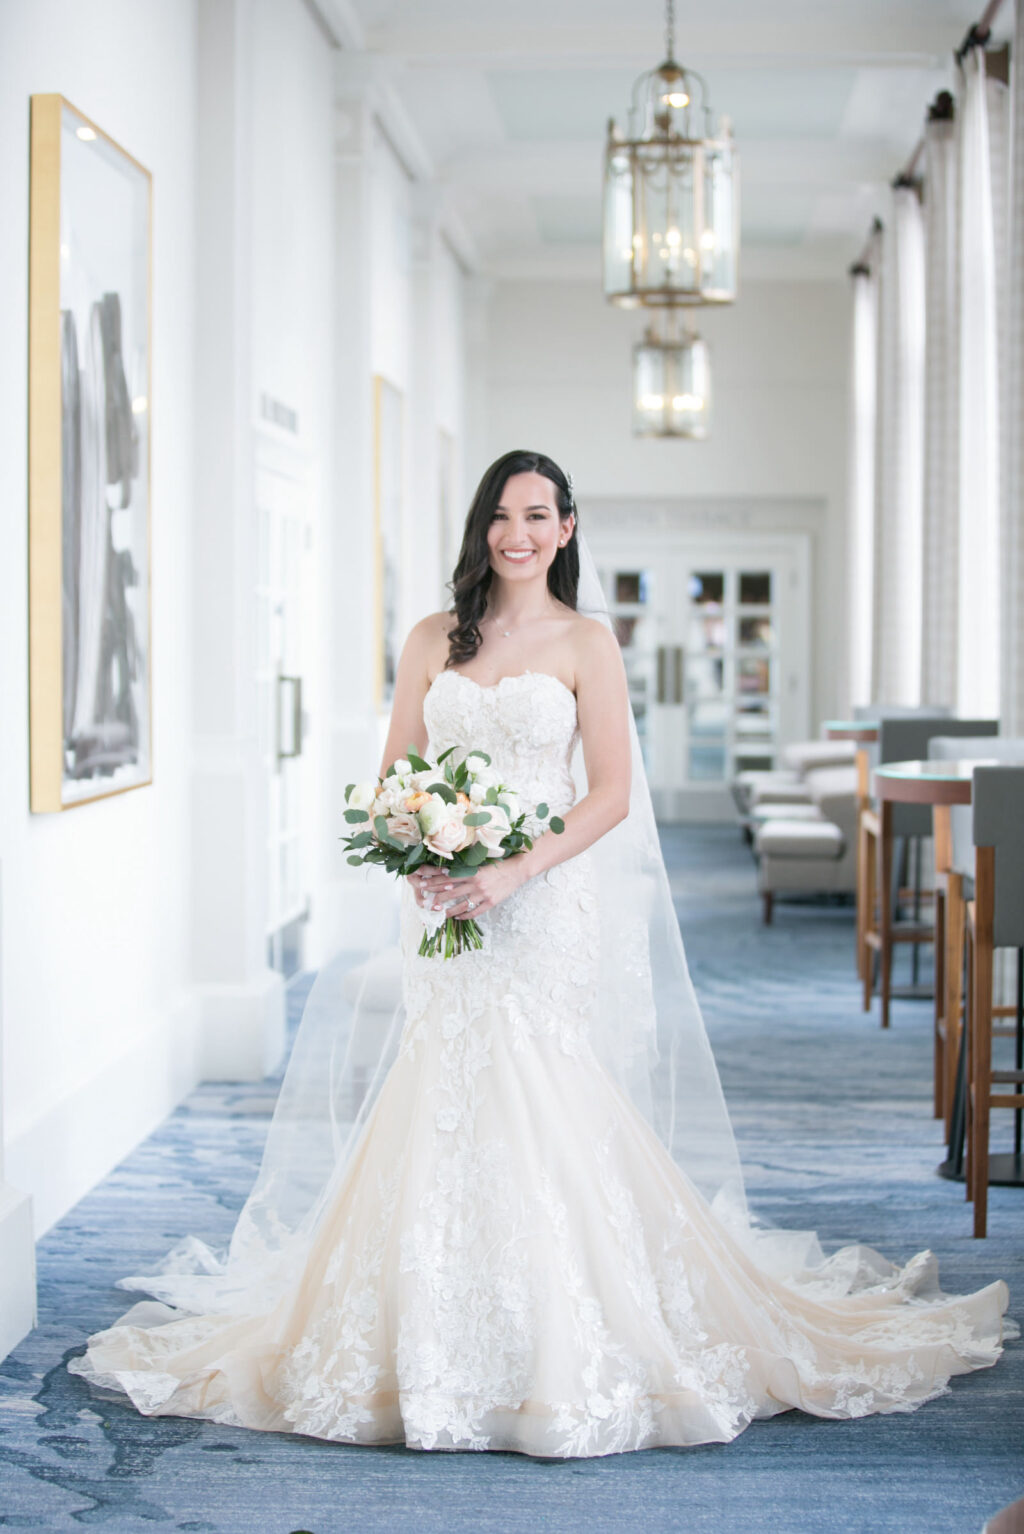 Bride in Fit and Flare Wedding Dress with Lace Detail and Long Train Veil | Winnie Couture | St. Pete Wedding Photographer Carrie Wildes Photography